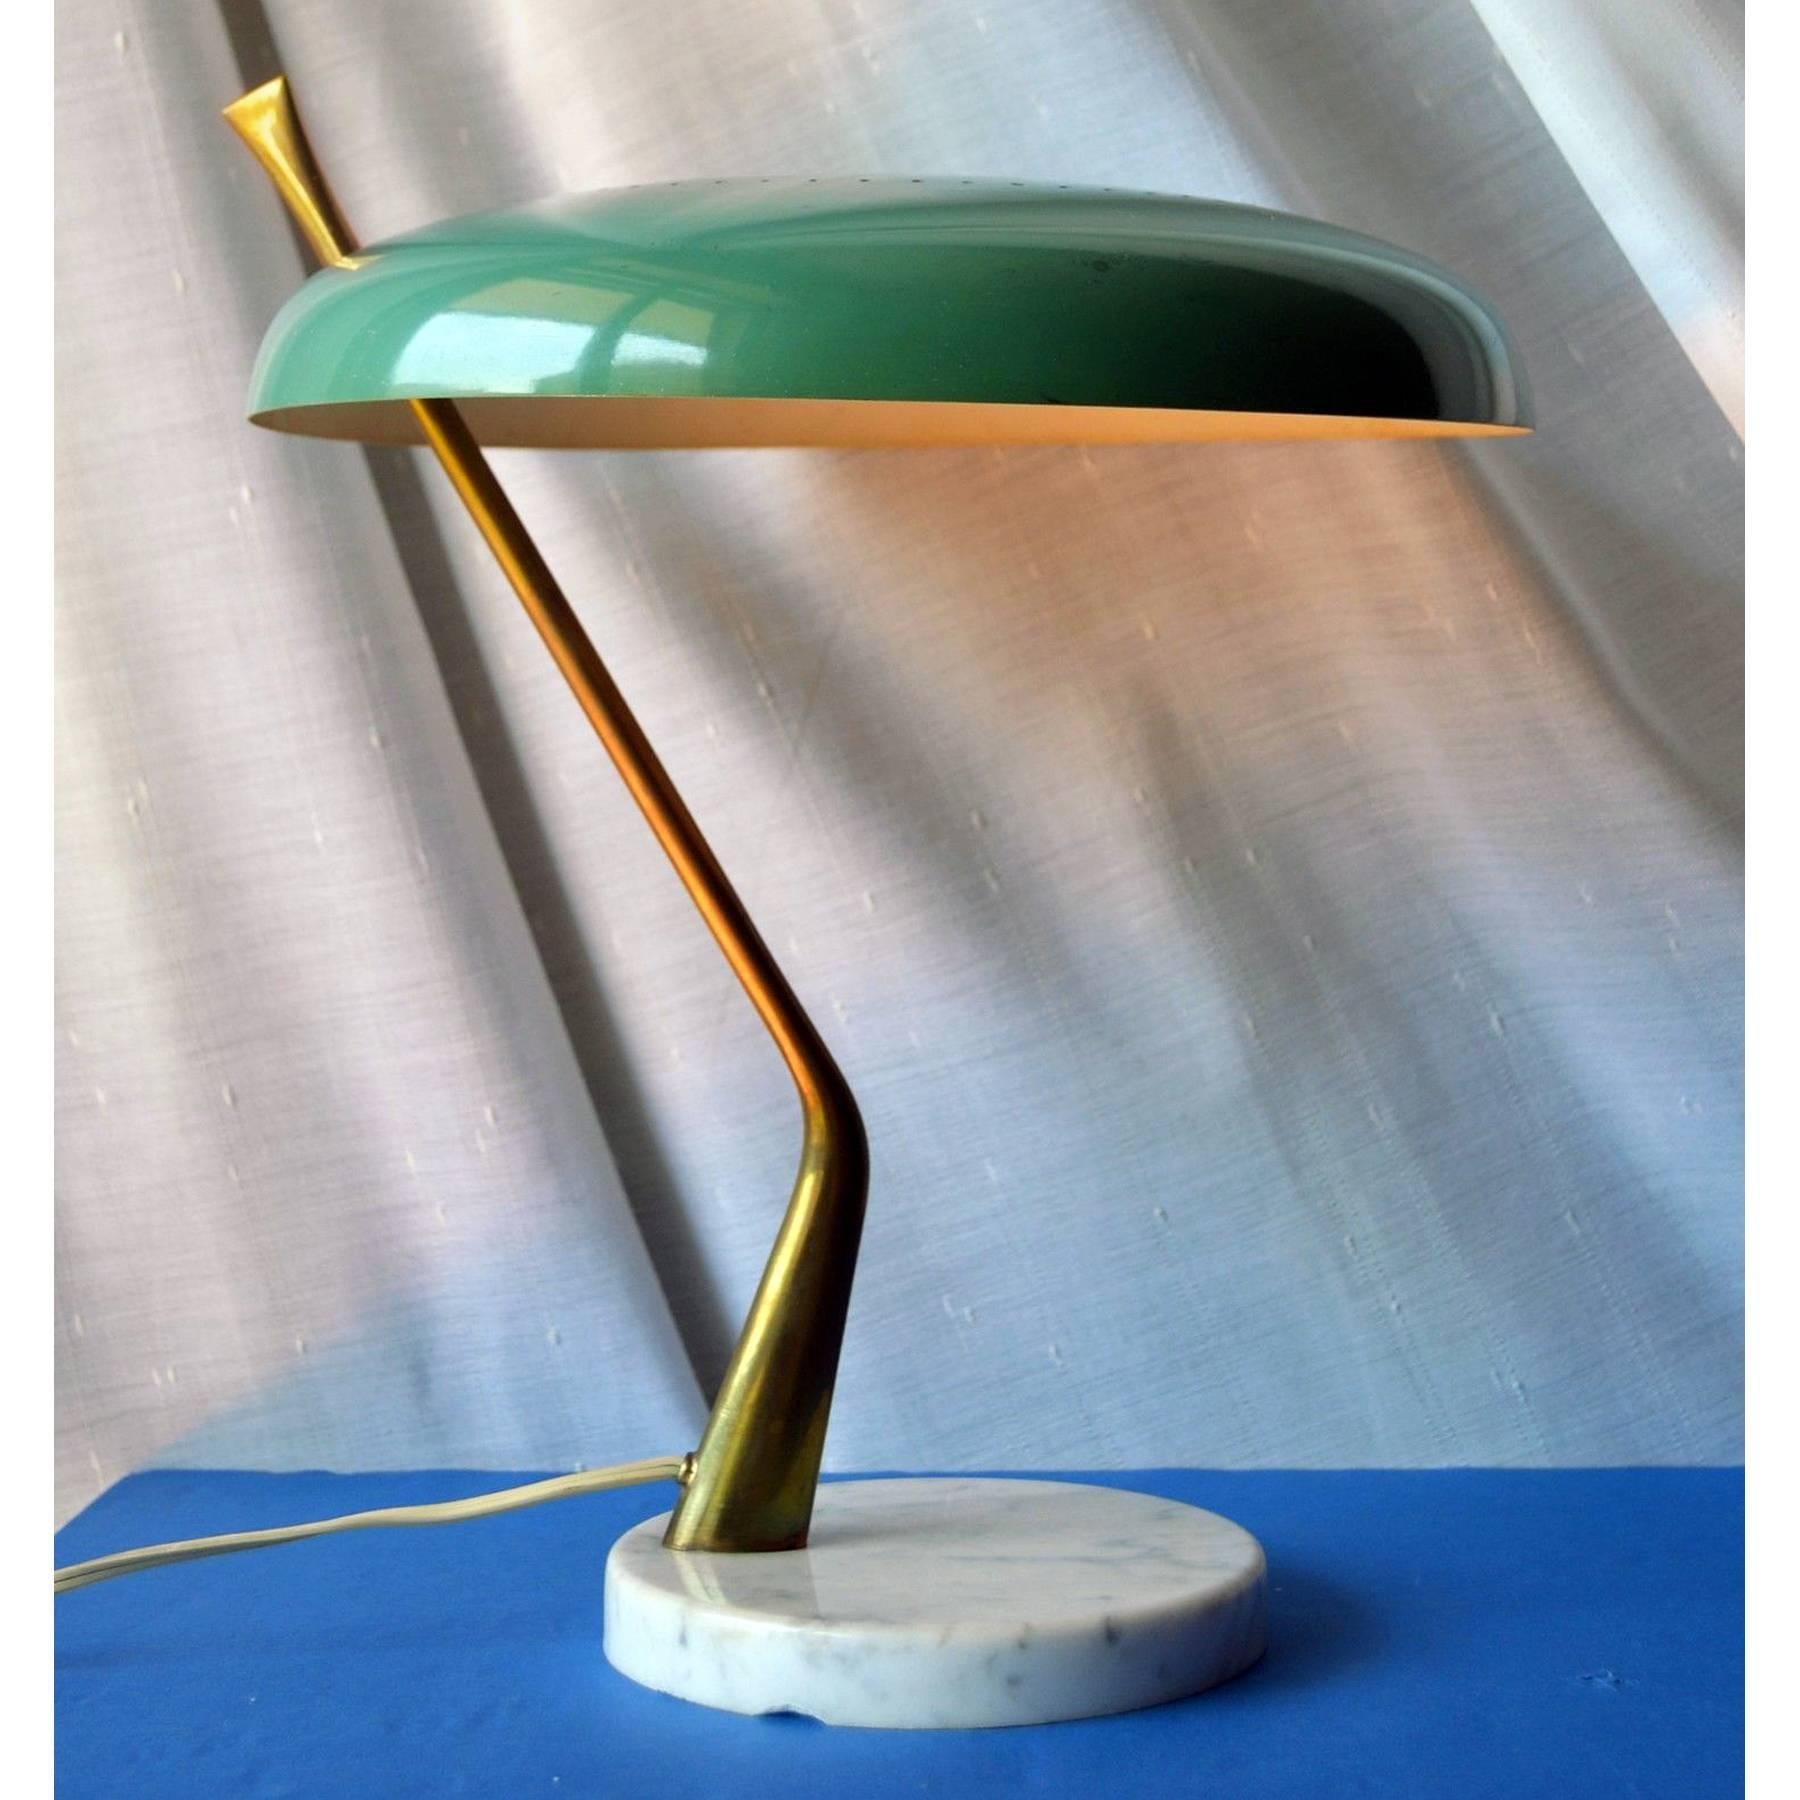 Stylish Italian desk or table lamp of the 1950s by Lumen.
The lacquered aluminium diffuser has its original and splendid green sage color, mounted on brass stem by unusual sculpted shape, finished with thick bevelled white marble base.
It's in